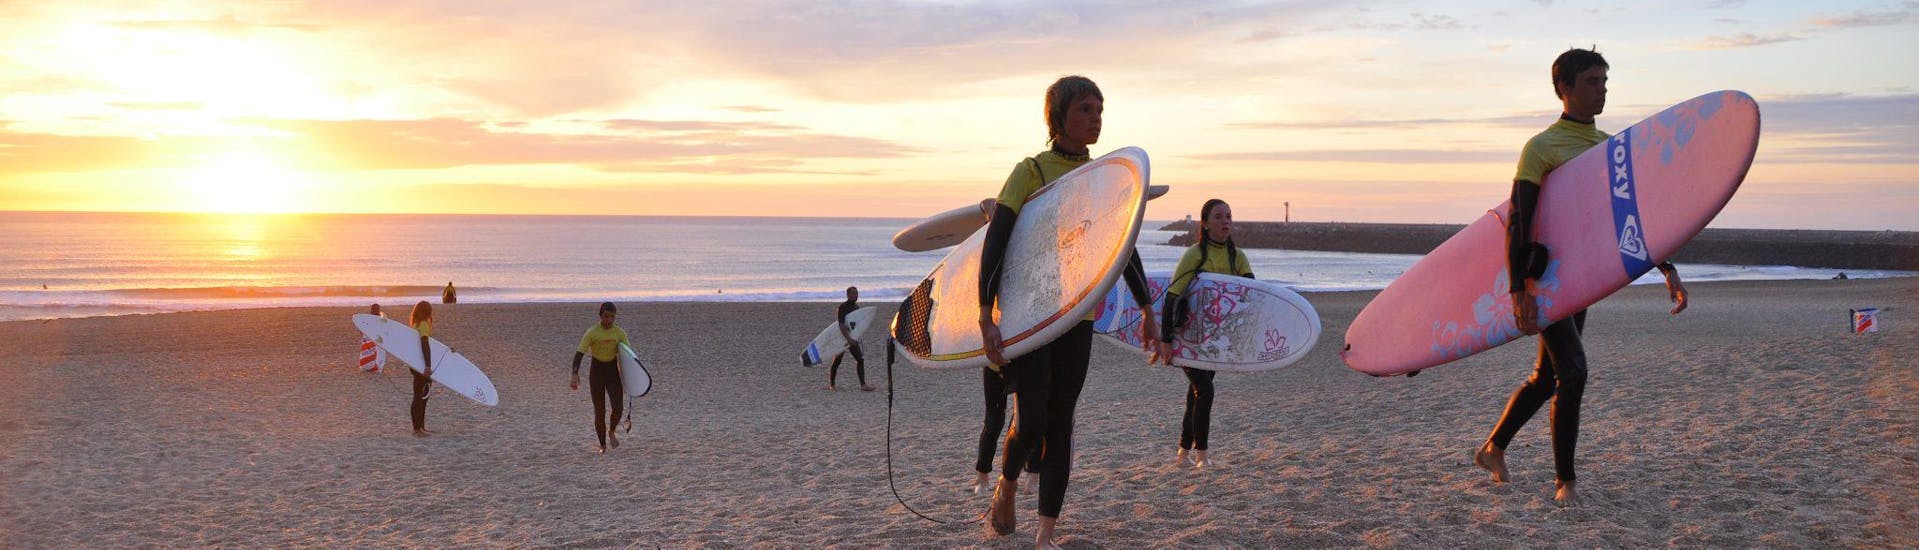 A group of young surfers on the beach at sunset.